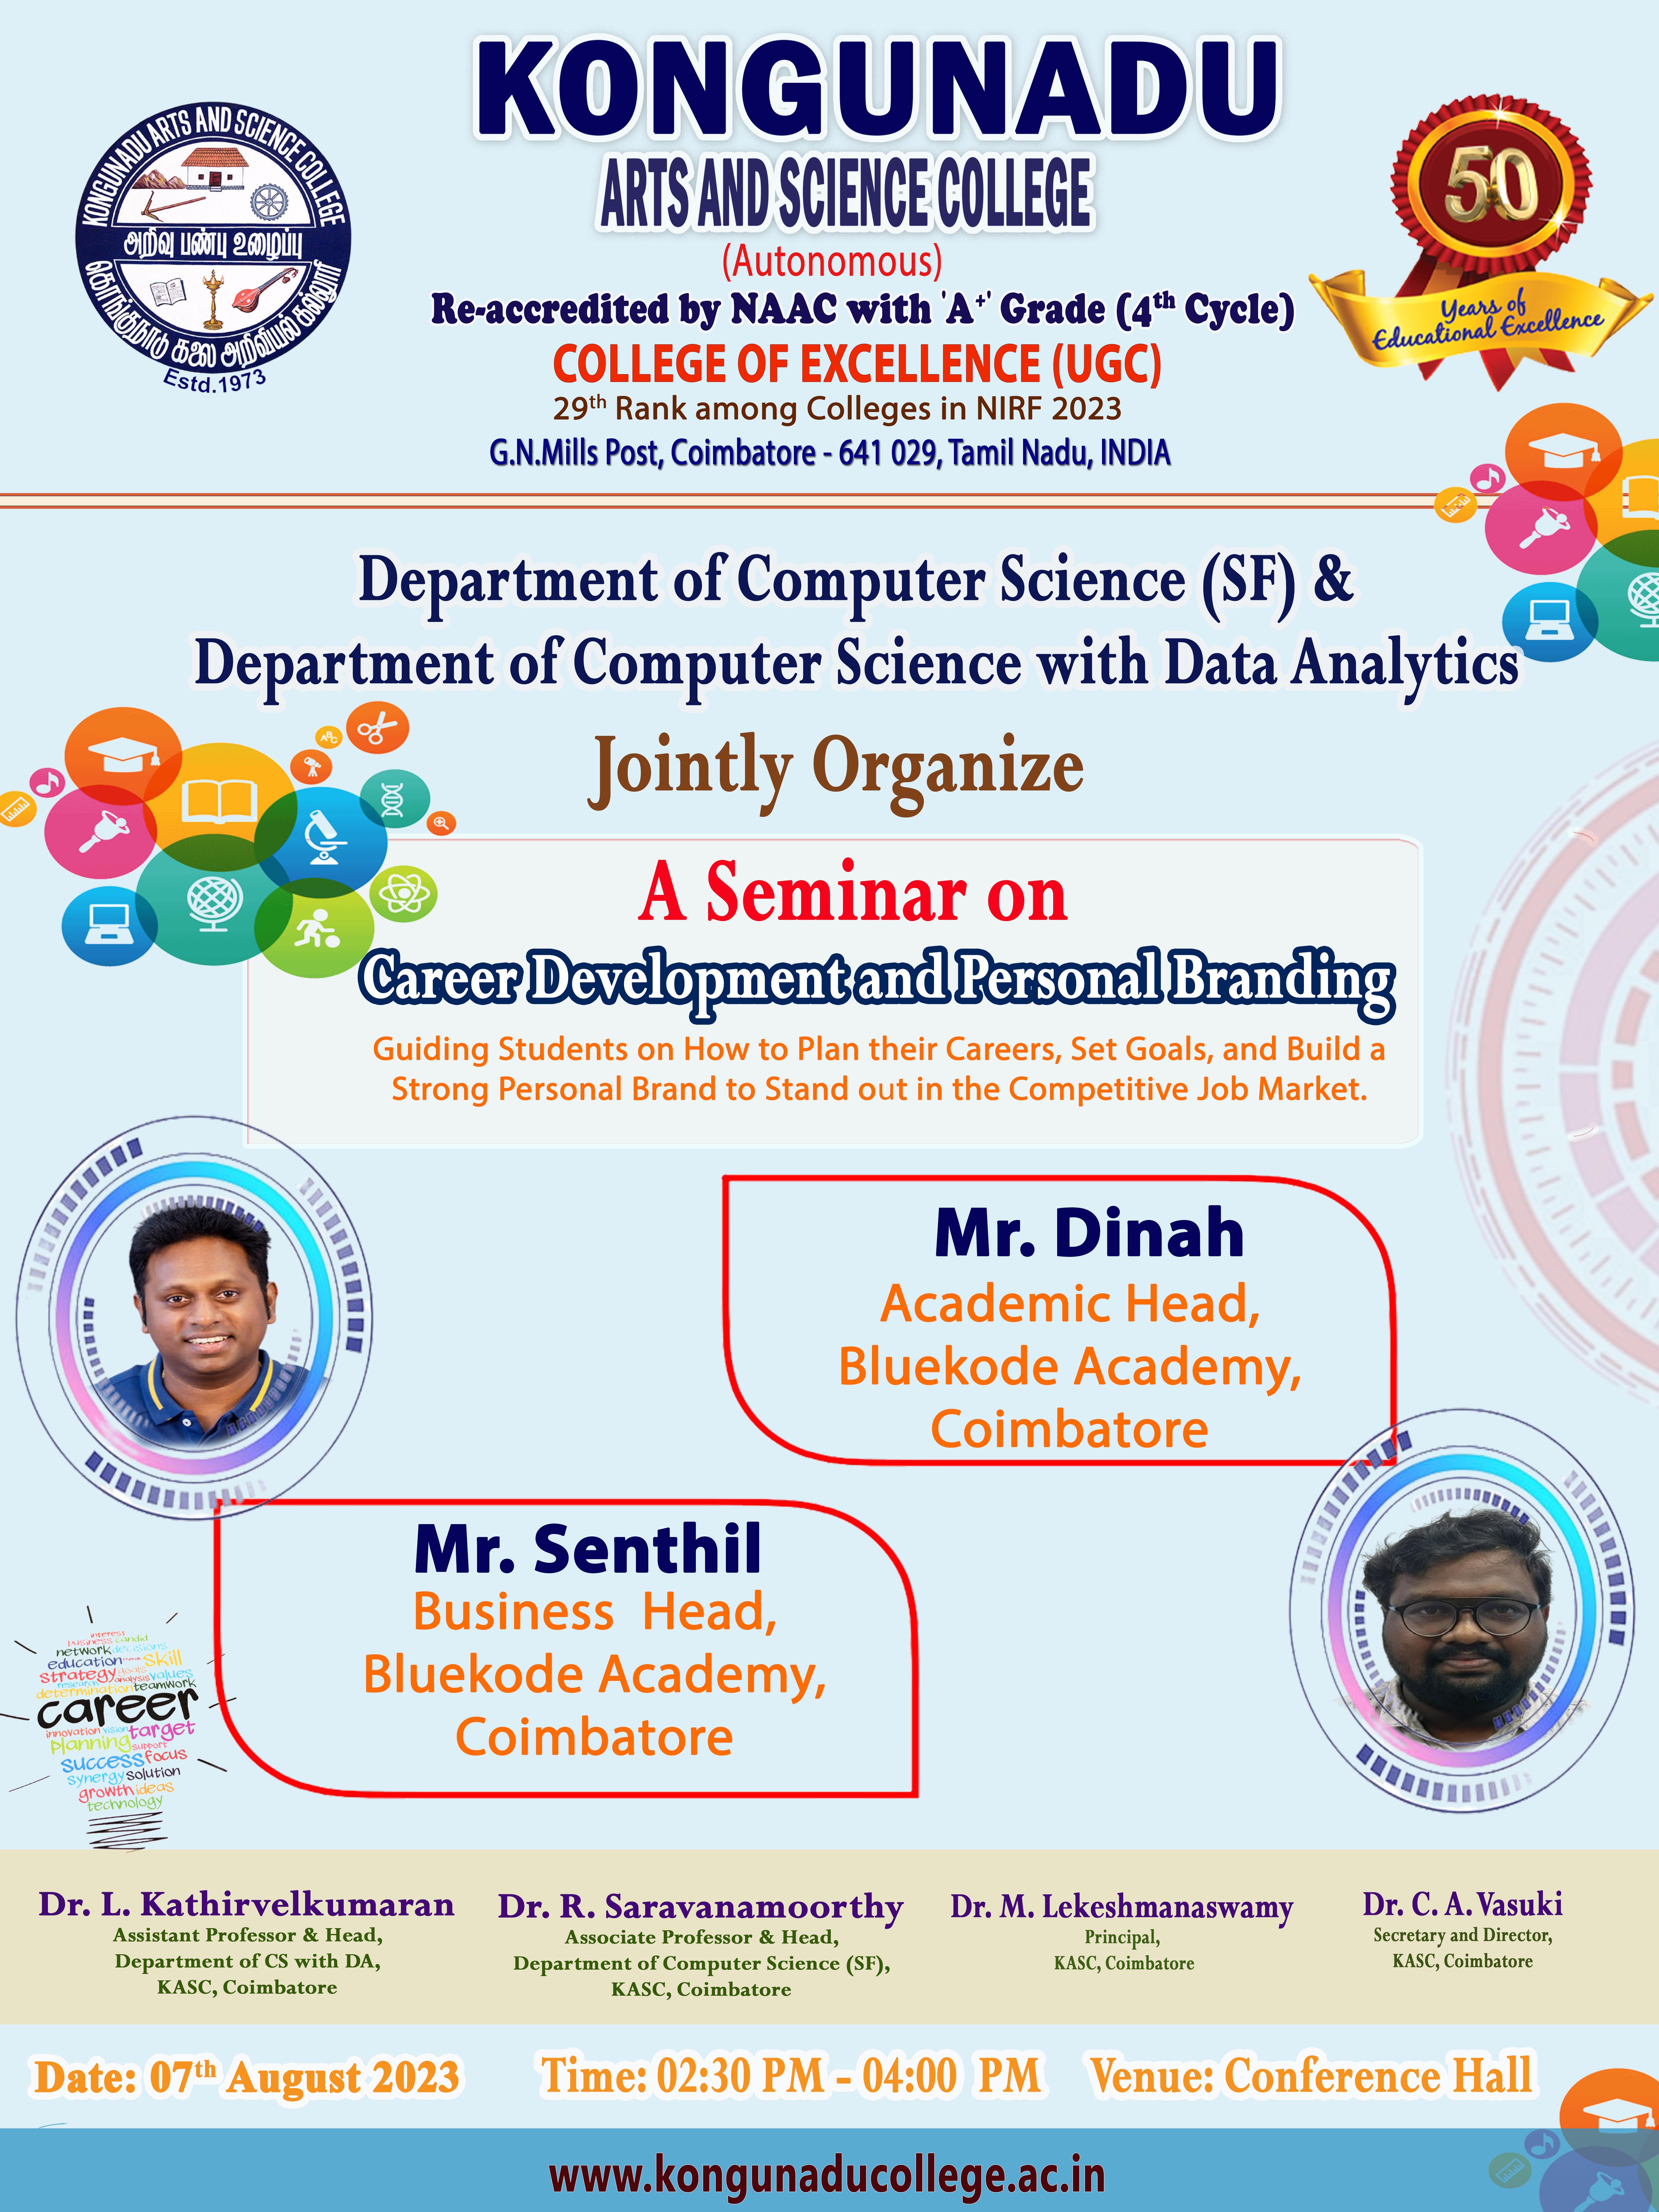  Department of Computer Science (SF) & Department of Computer Science with Data Analytics Jointly Organize A Seminar on Career Development and Personal Branding